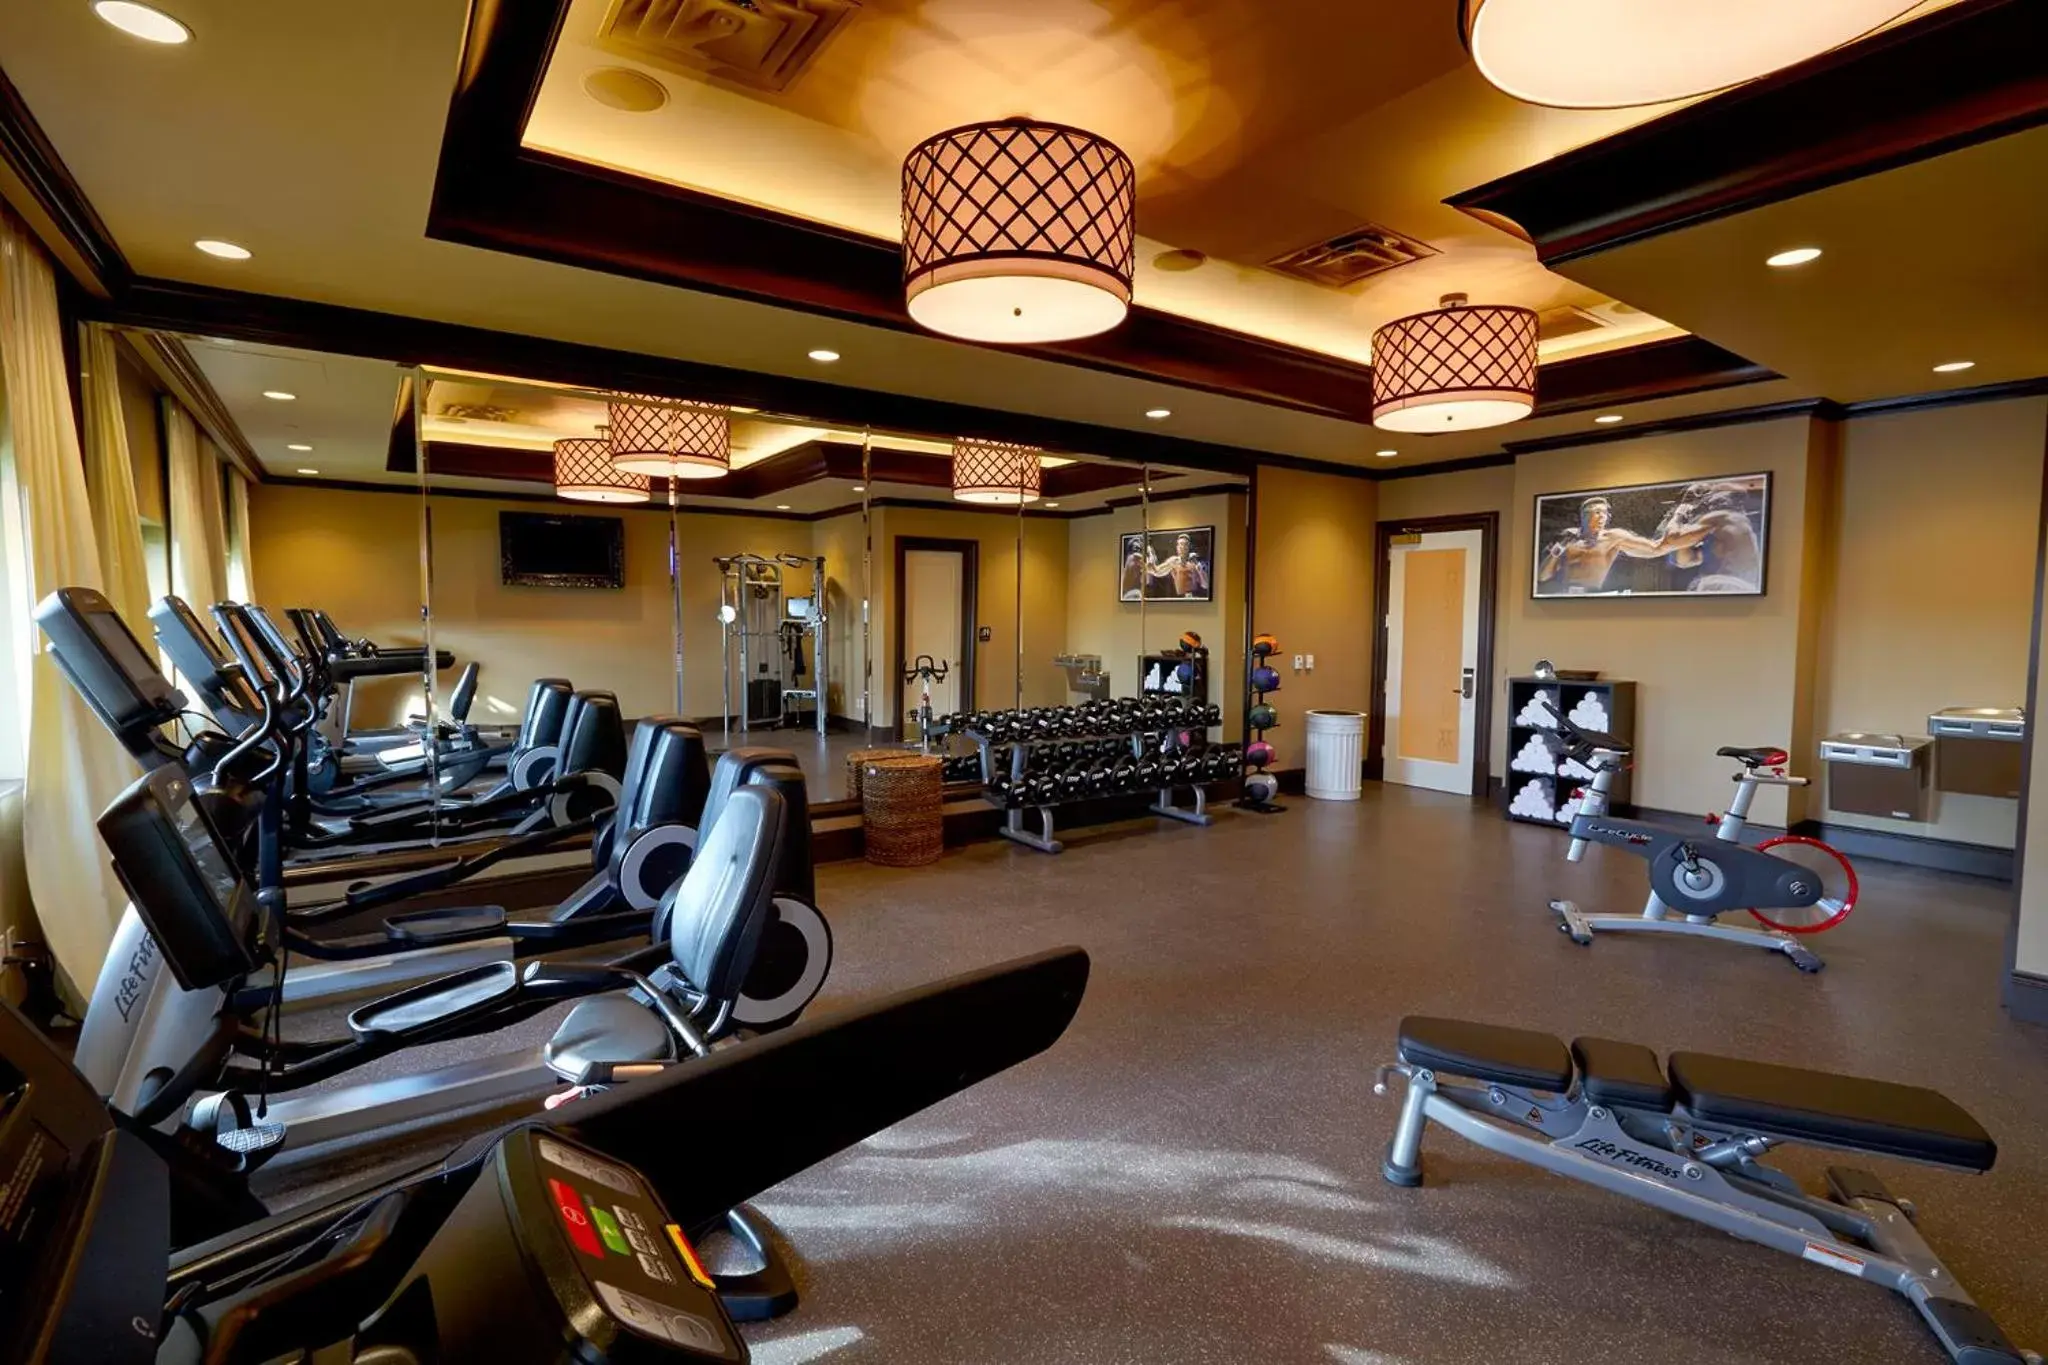 Fitness centre/facilities, Fitness Center/Facilities in River City Casino and Hotel